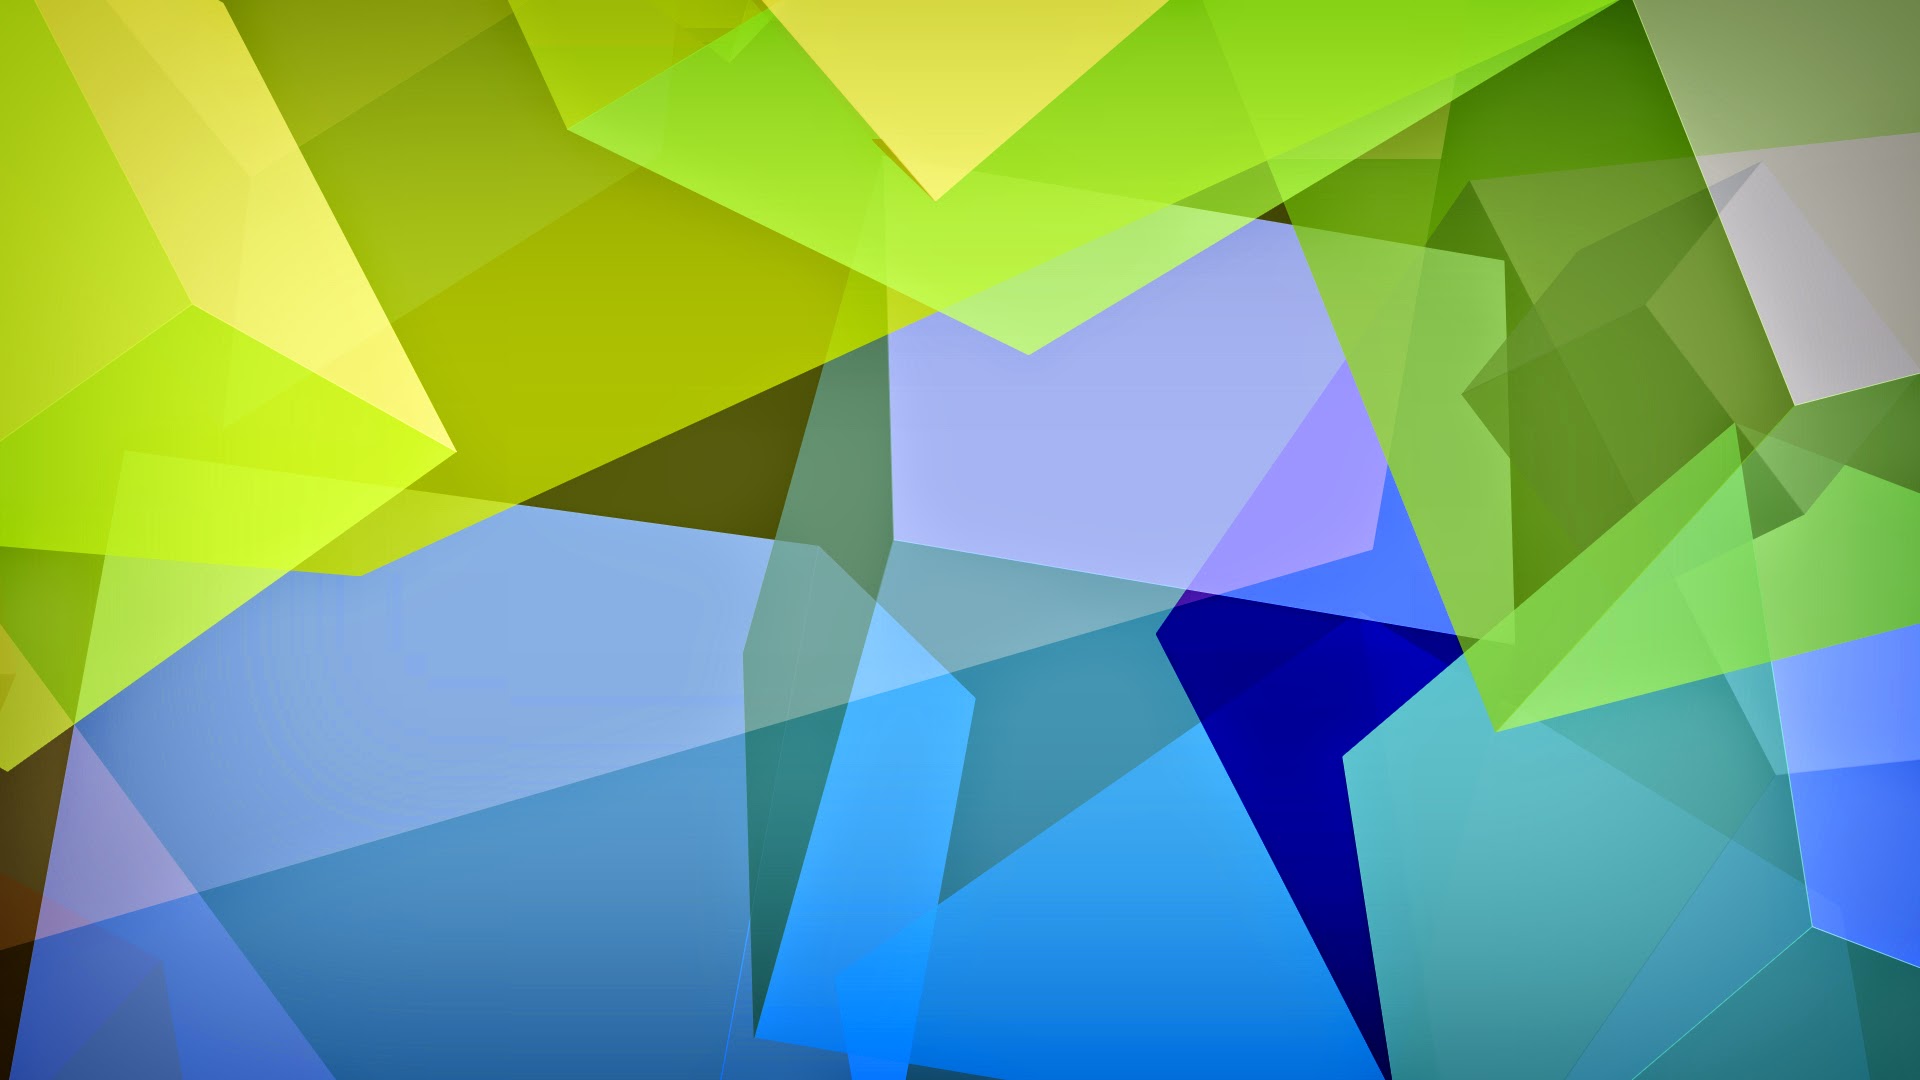 Wallpaper 3d colorful pattern abstract